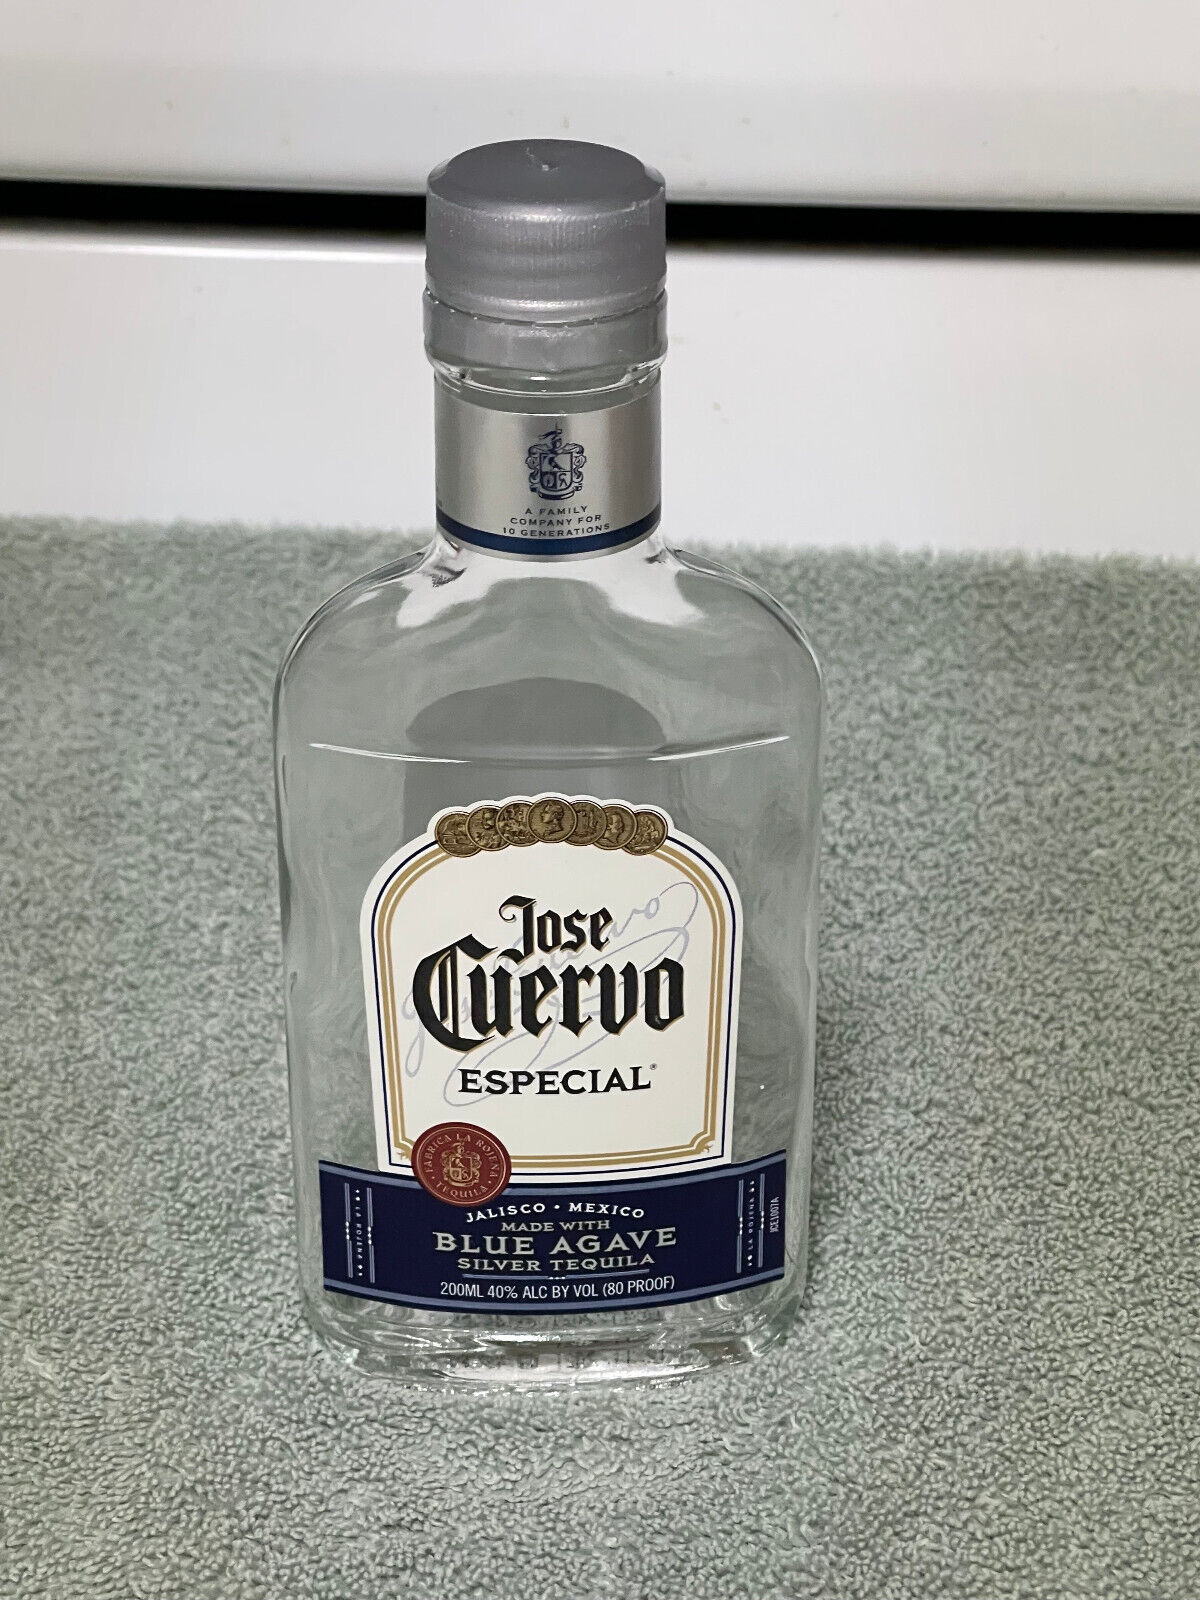 1 VERY RARE JOSE CUERVO ESPECIAL BLUE AGAVE SILVER TEQUILA 200 ML BOTTLE EMPTY